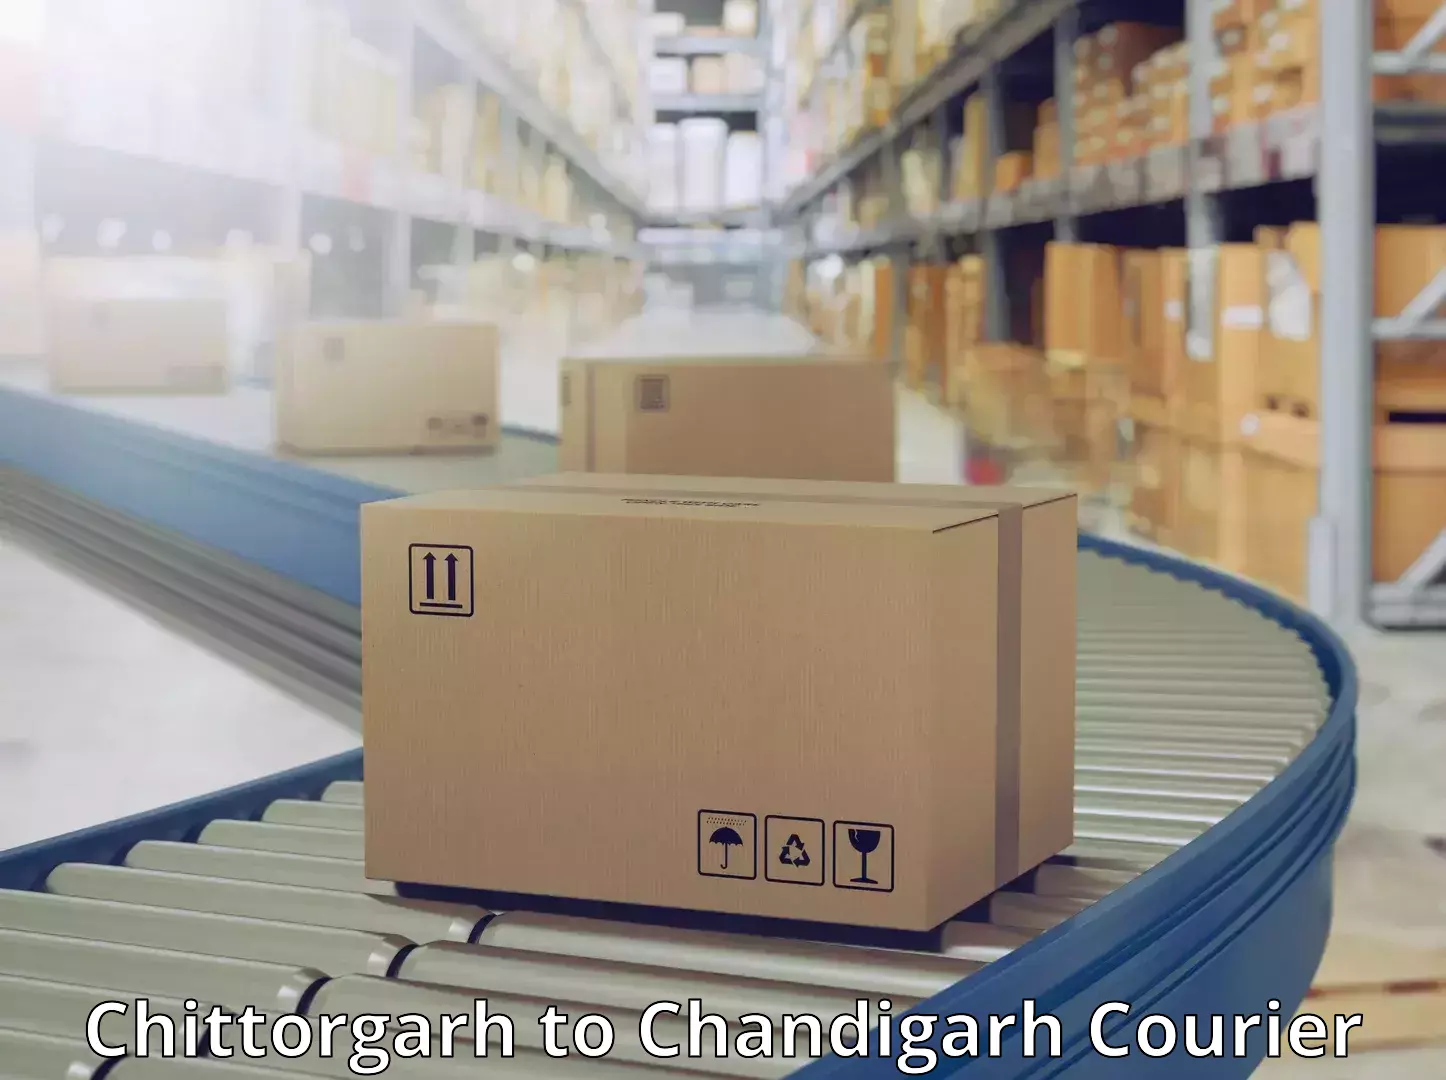 Enhanced shipping experience in Chittorgarh to Chandigarh